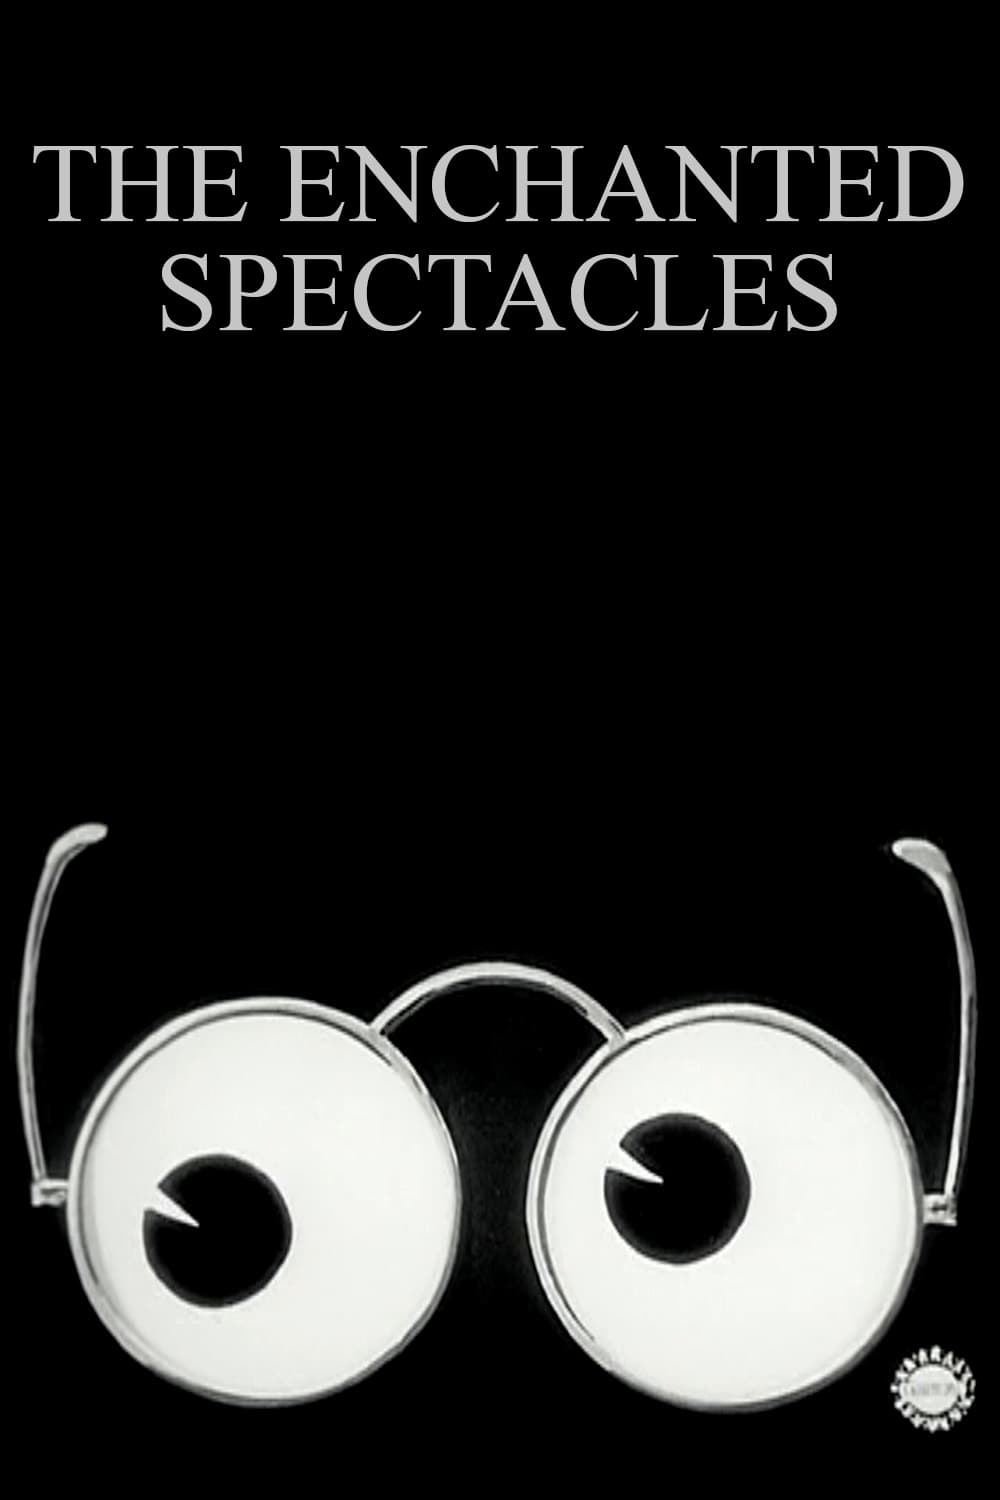 The Enchanted Spectacles